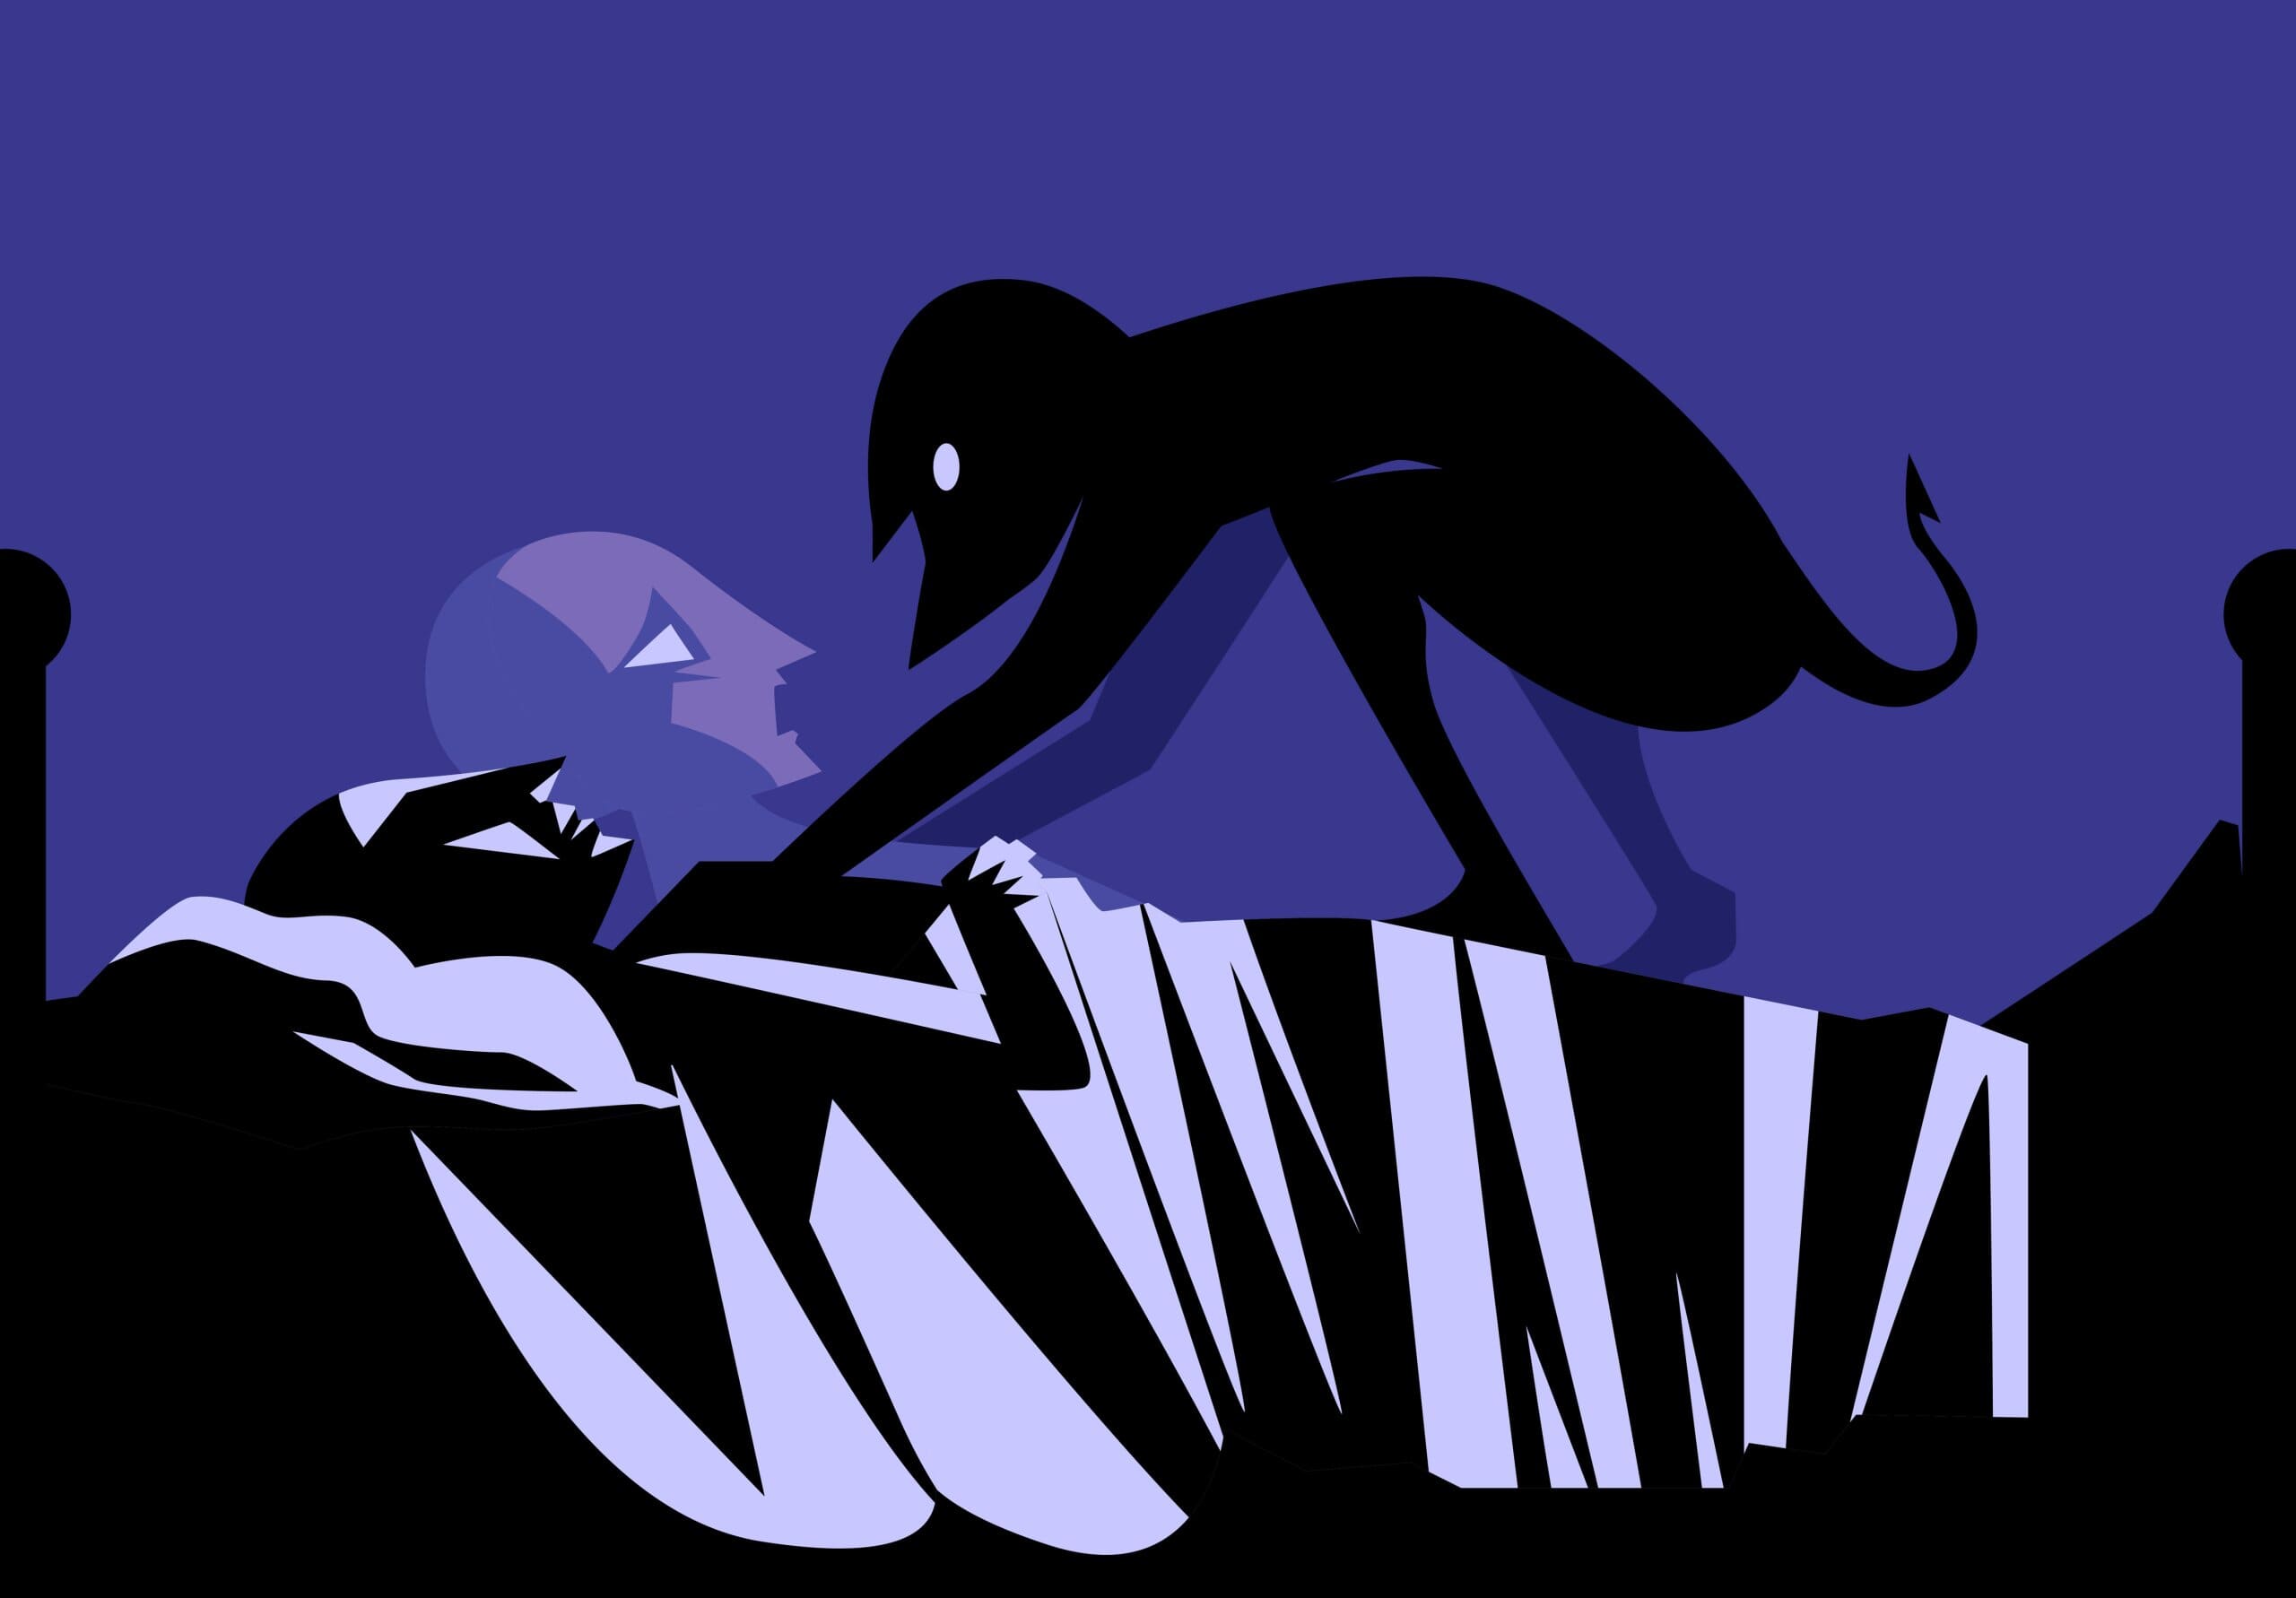 Cartoon image of a dark demon sitting on top of a sleeping person's chest.